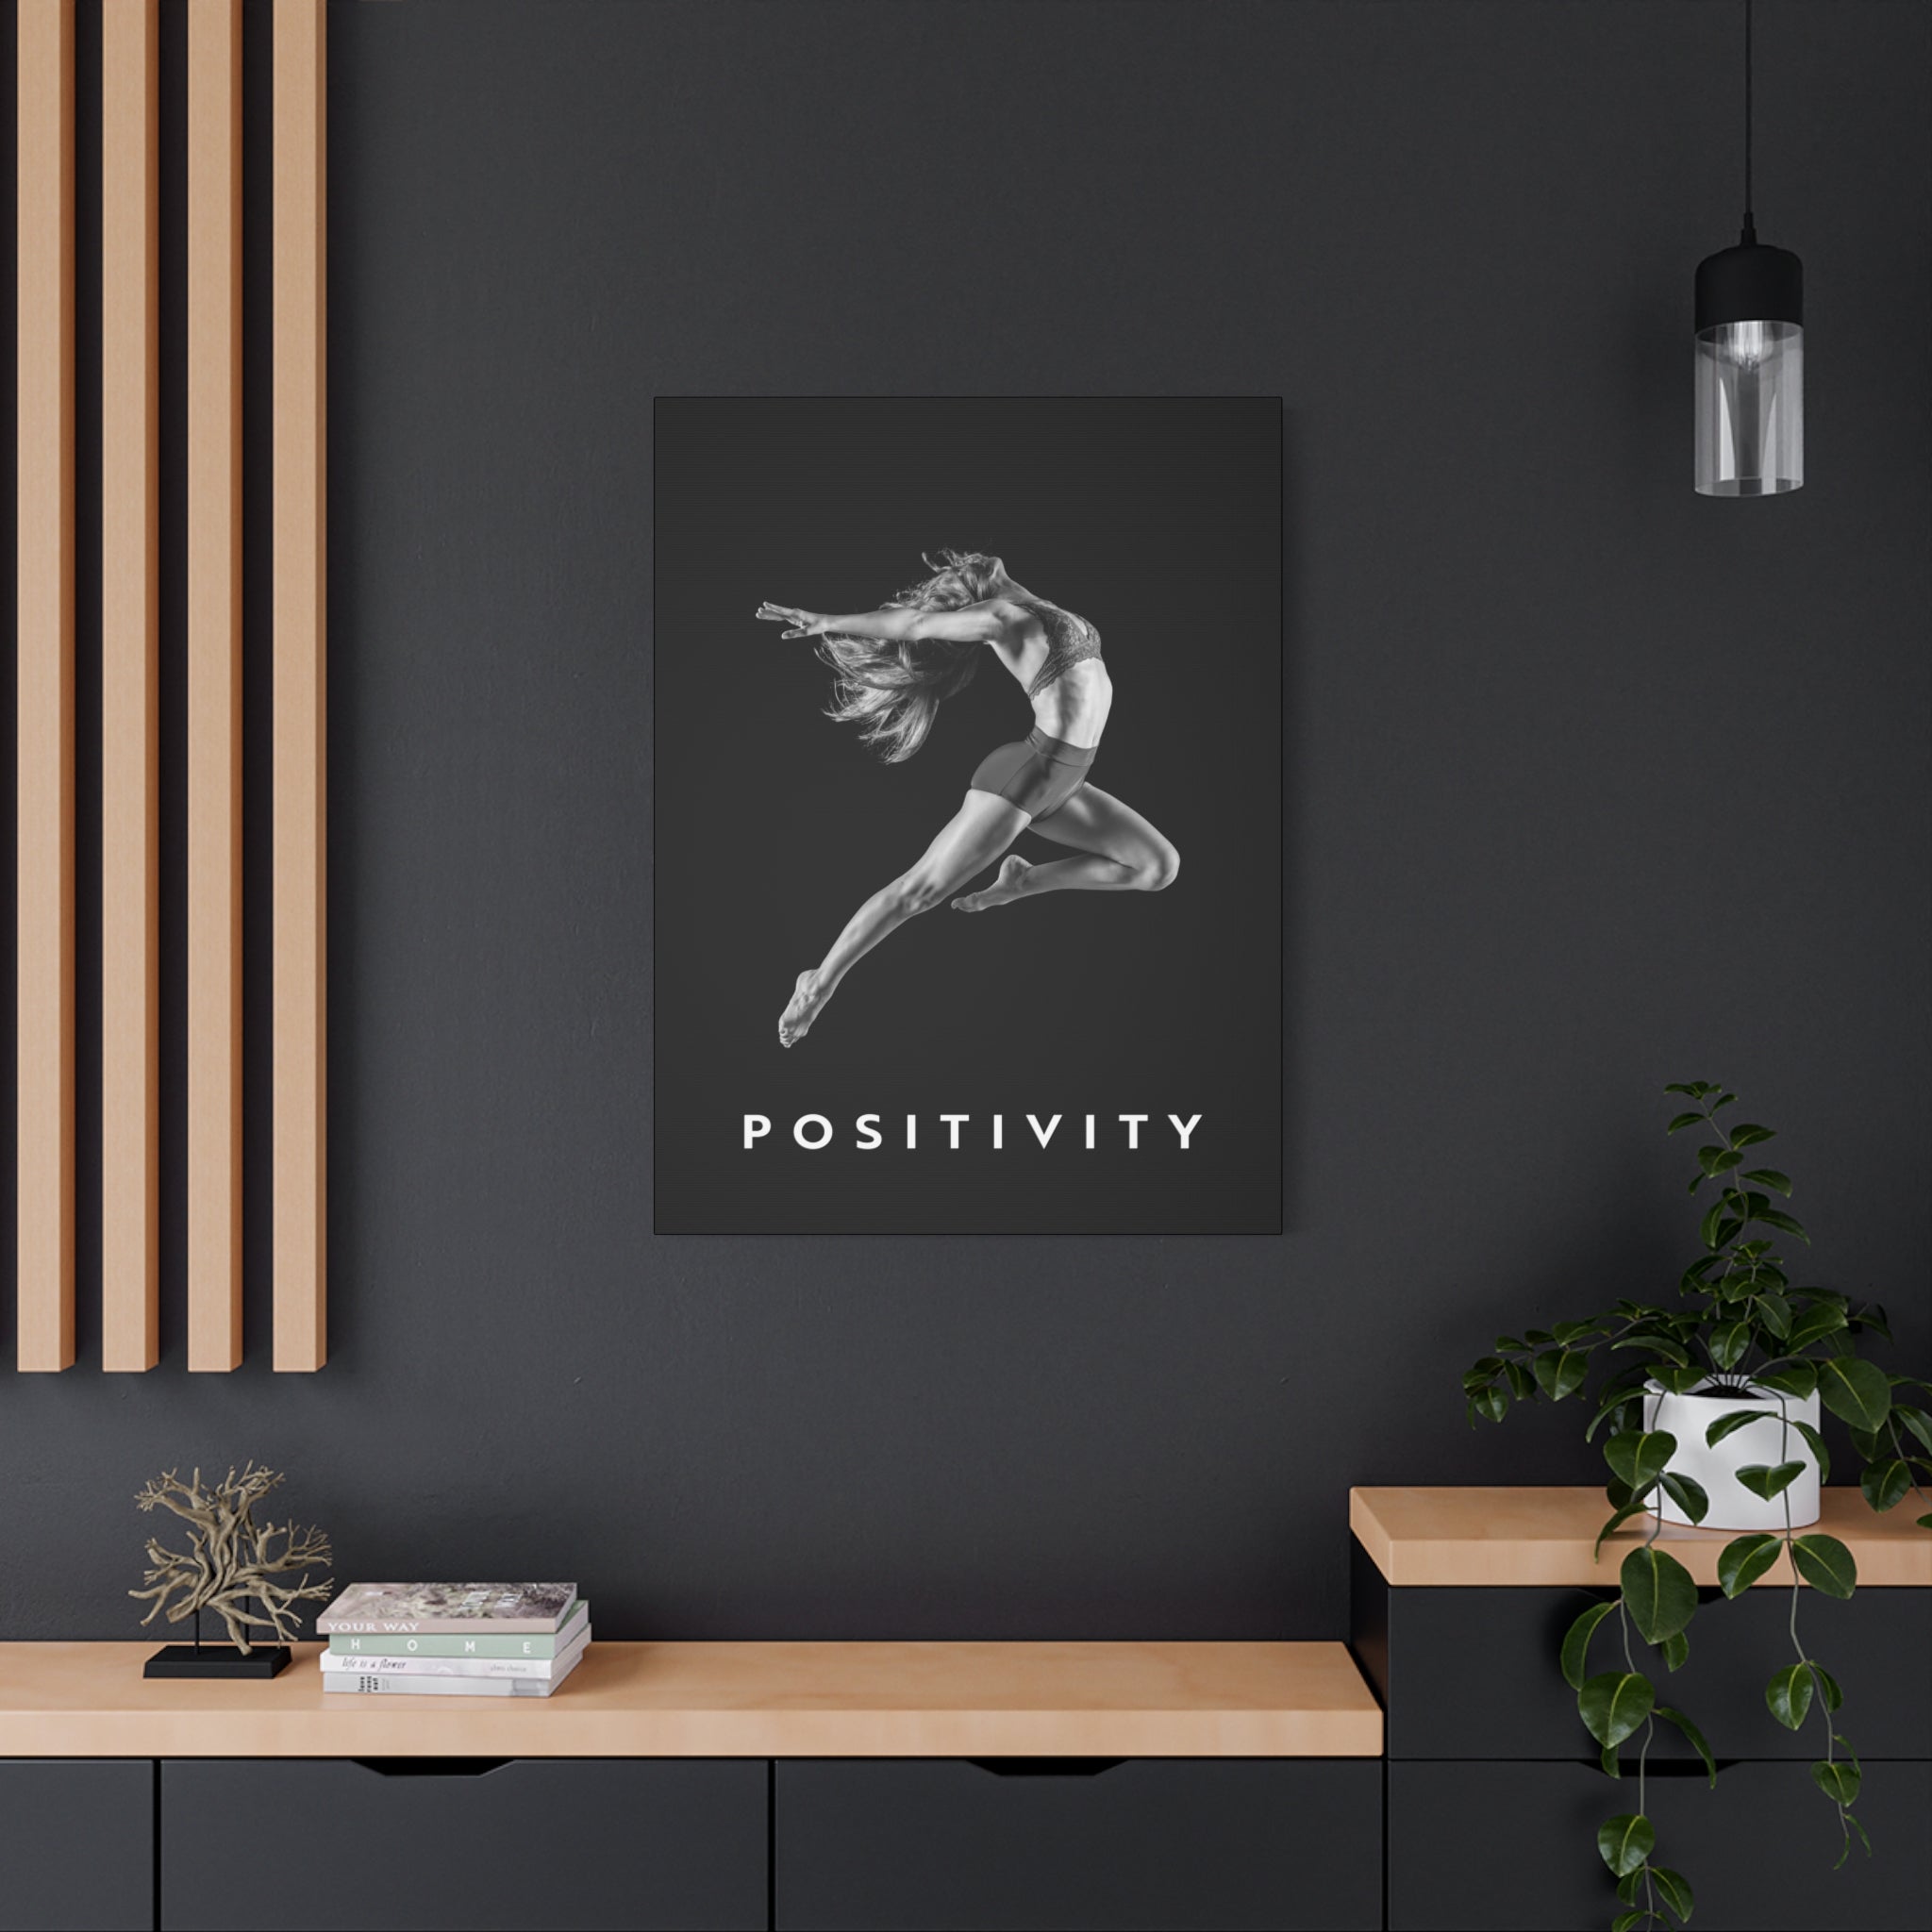 Positivity - Airborne Black And White - Wall Art additional image 4